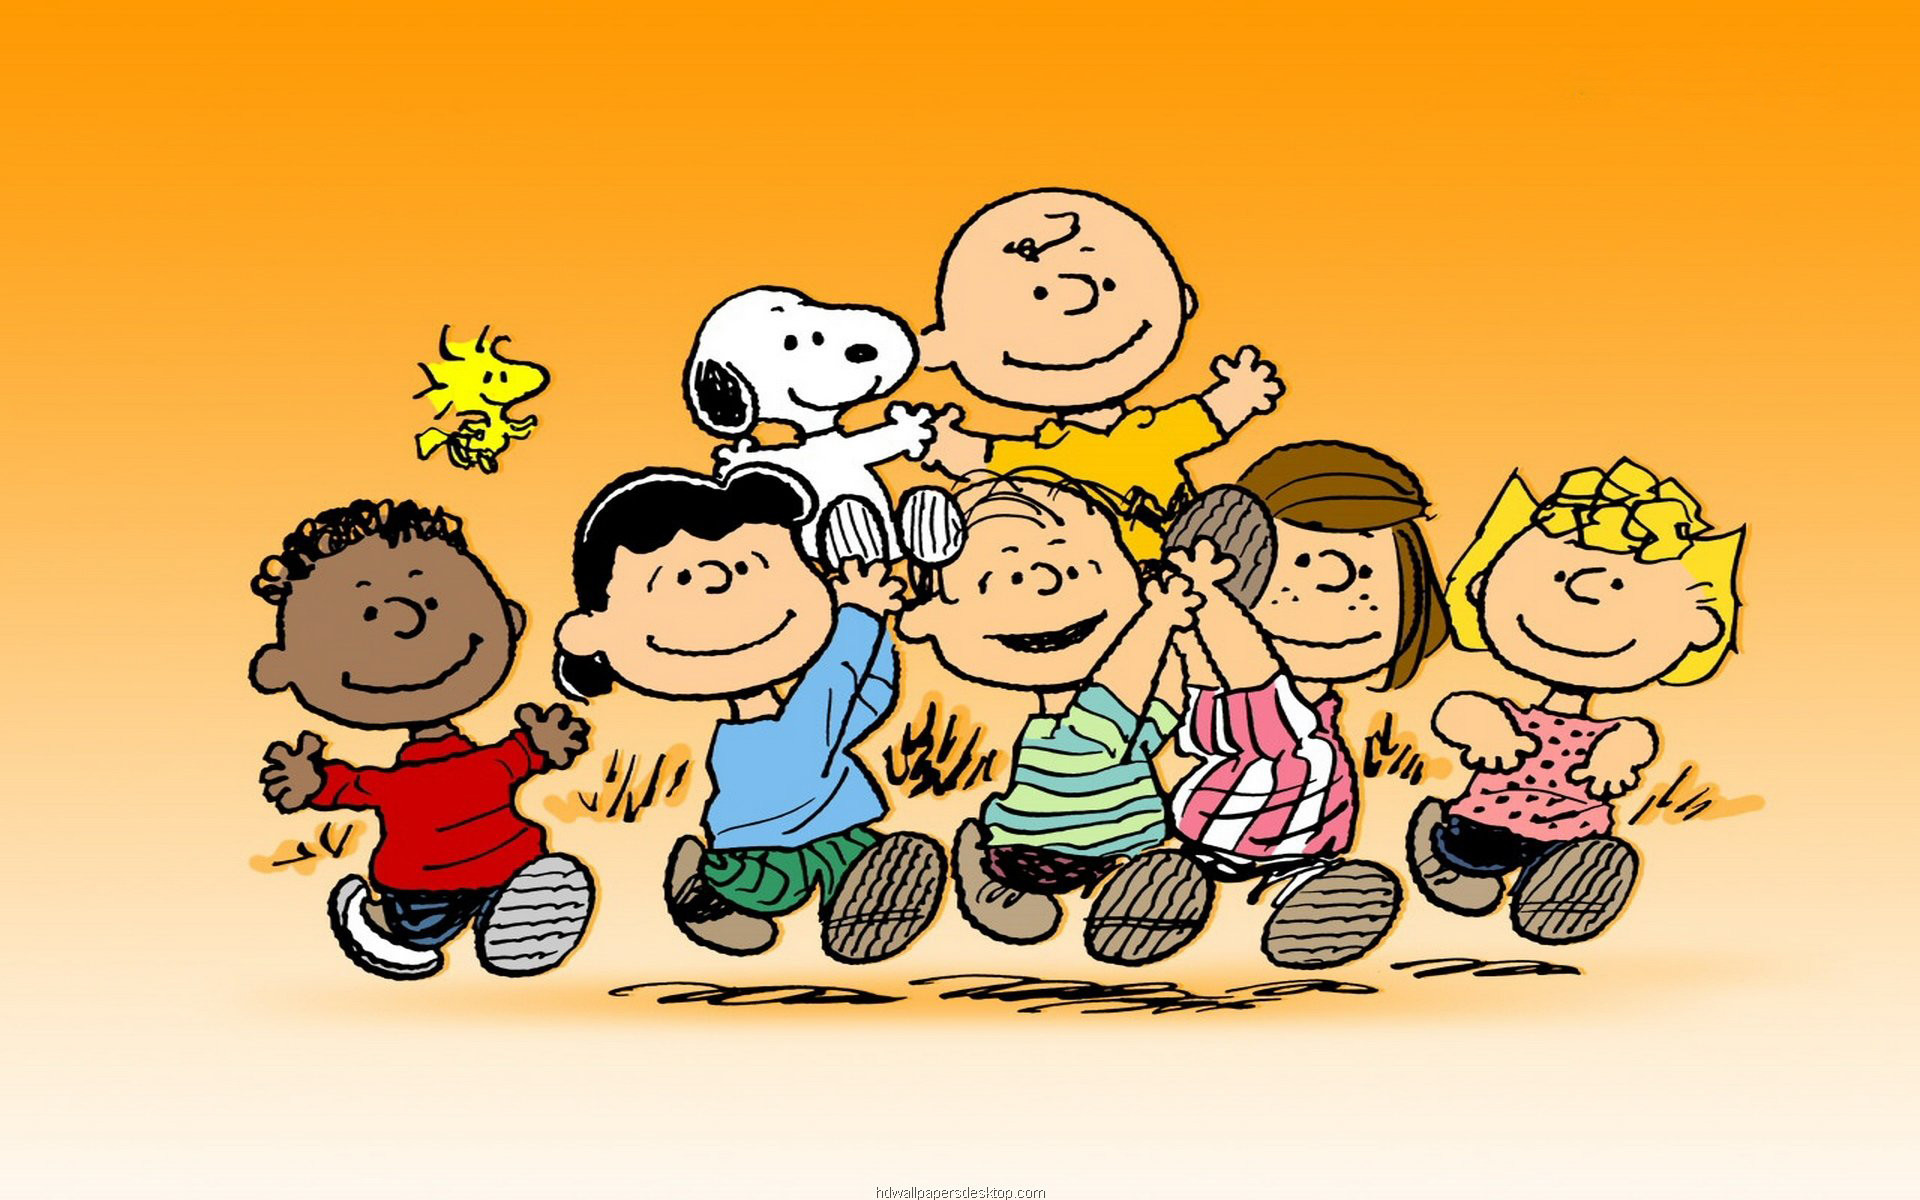 1920x1200 Snoopy-wallpaper-cartoon-wallpapers-cartoons-image-images-imagepages